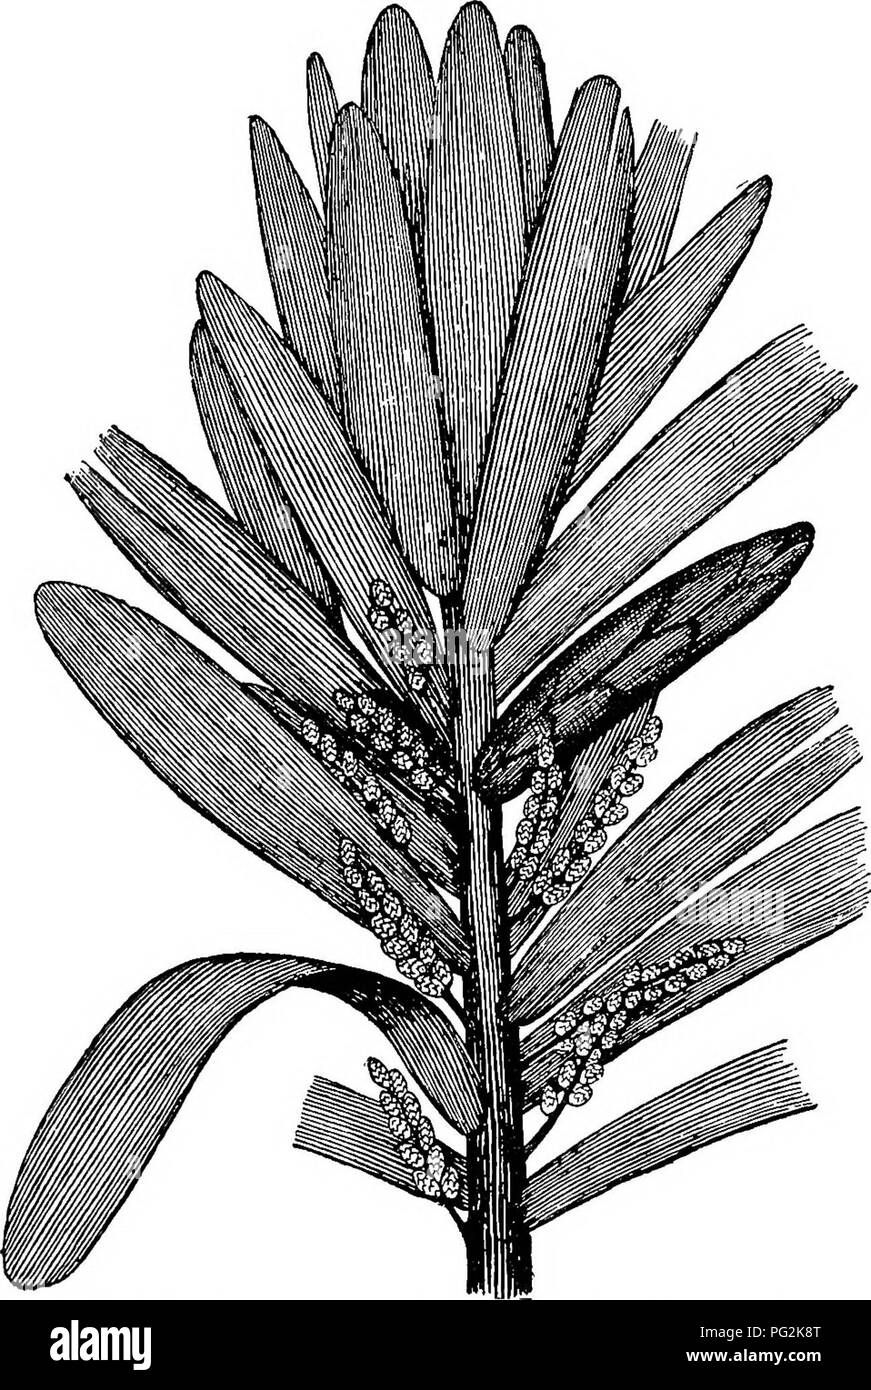 . Morphology of gymnosperms. Gymnosperms; Plant morphology. CORDAITALES 169 daites are grasslike, not over half a meter long and about a centimeter wide. In still other cases, the leaves are said to be comparatively. Fig. 199.—Cordaites laevis: restoration of branch with spatulate leaves and branches bearing numerous strobili; a large bud is shown at the right.—After Grand 'EUEY (2). short and obovate, cen branching dichotomously, a type suggestive of the leaves of Ginkgo. The recorded anatomy of the leaves has all been obtained from Cordaites, and is very characteristic (figs. 200-202). Each  Stock Photo